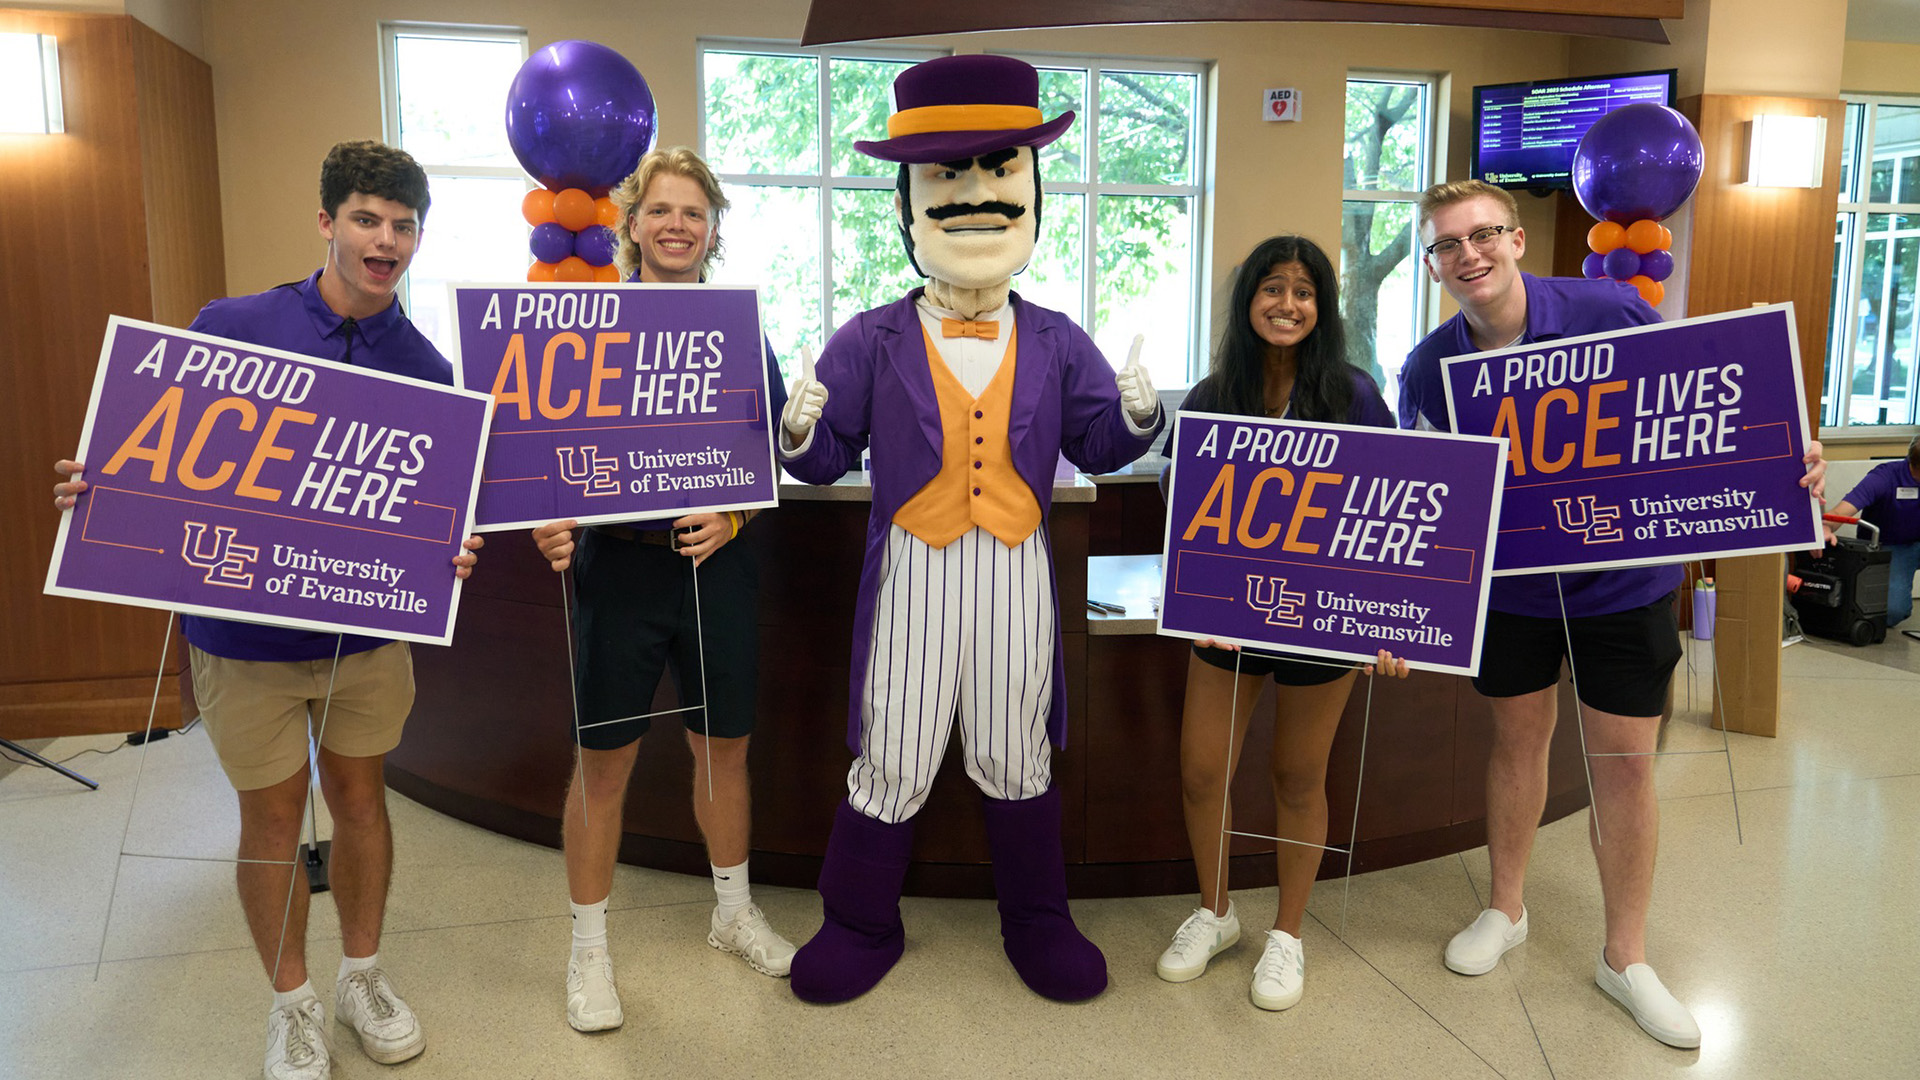 Ace Purple with students holding signs that say A Proud Ace Lives Here